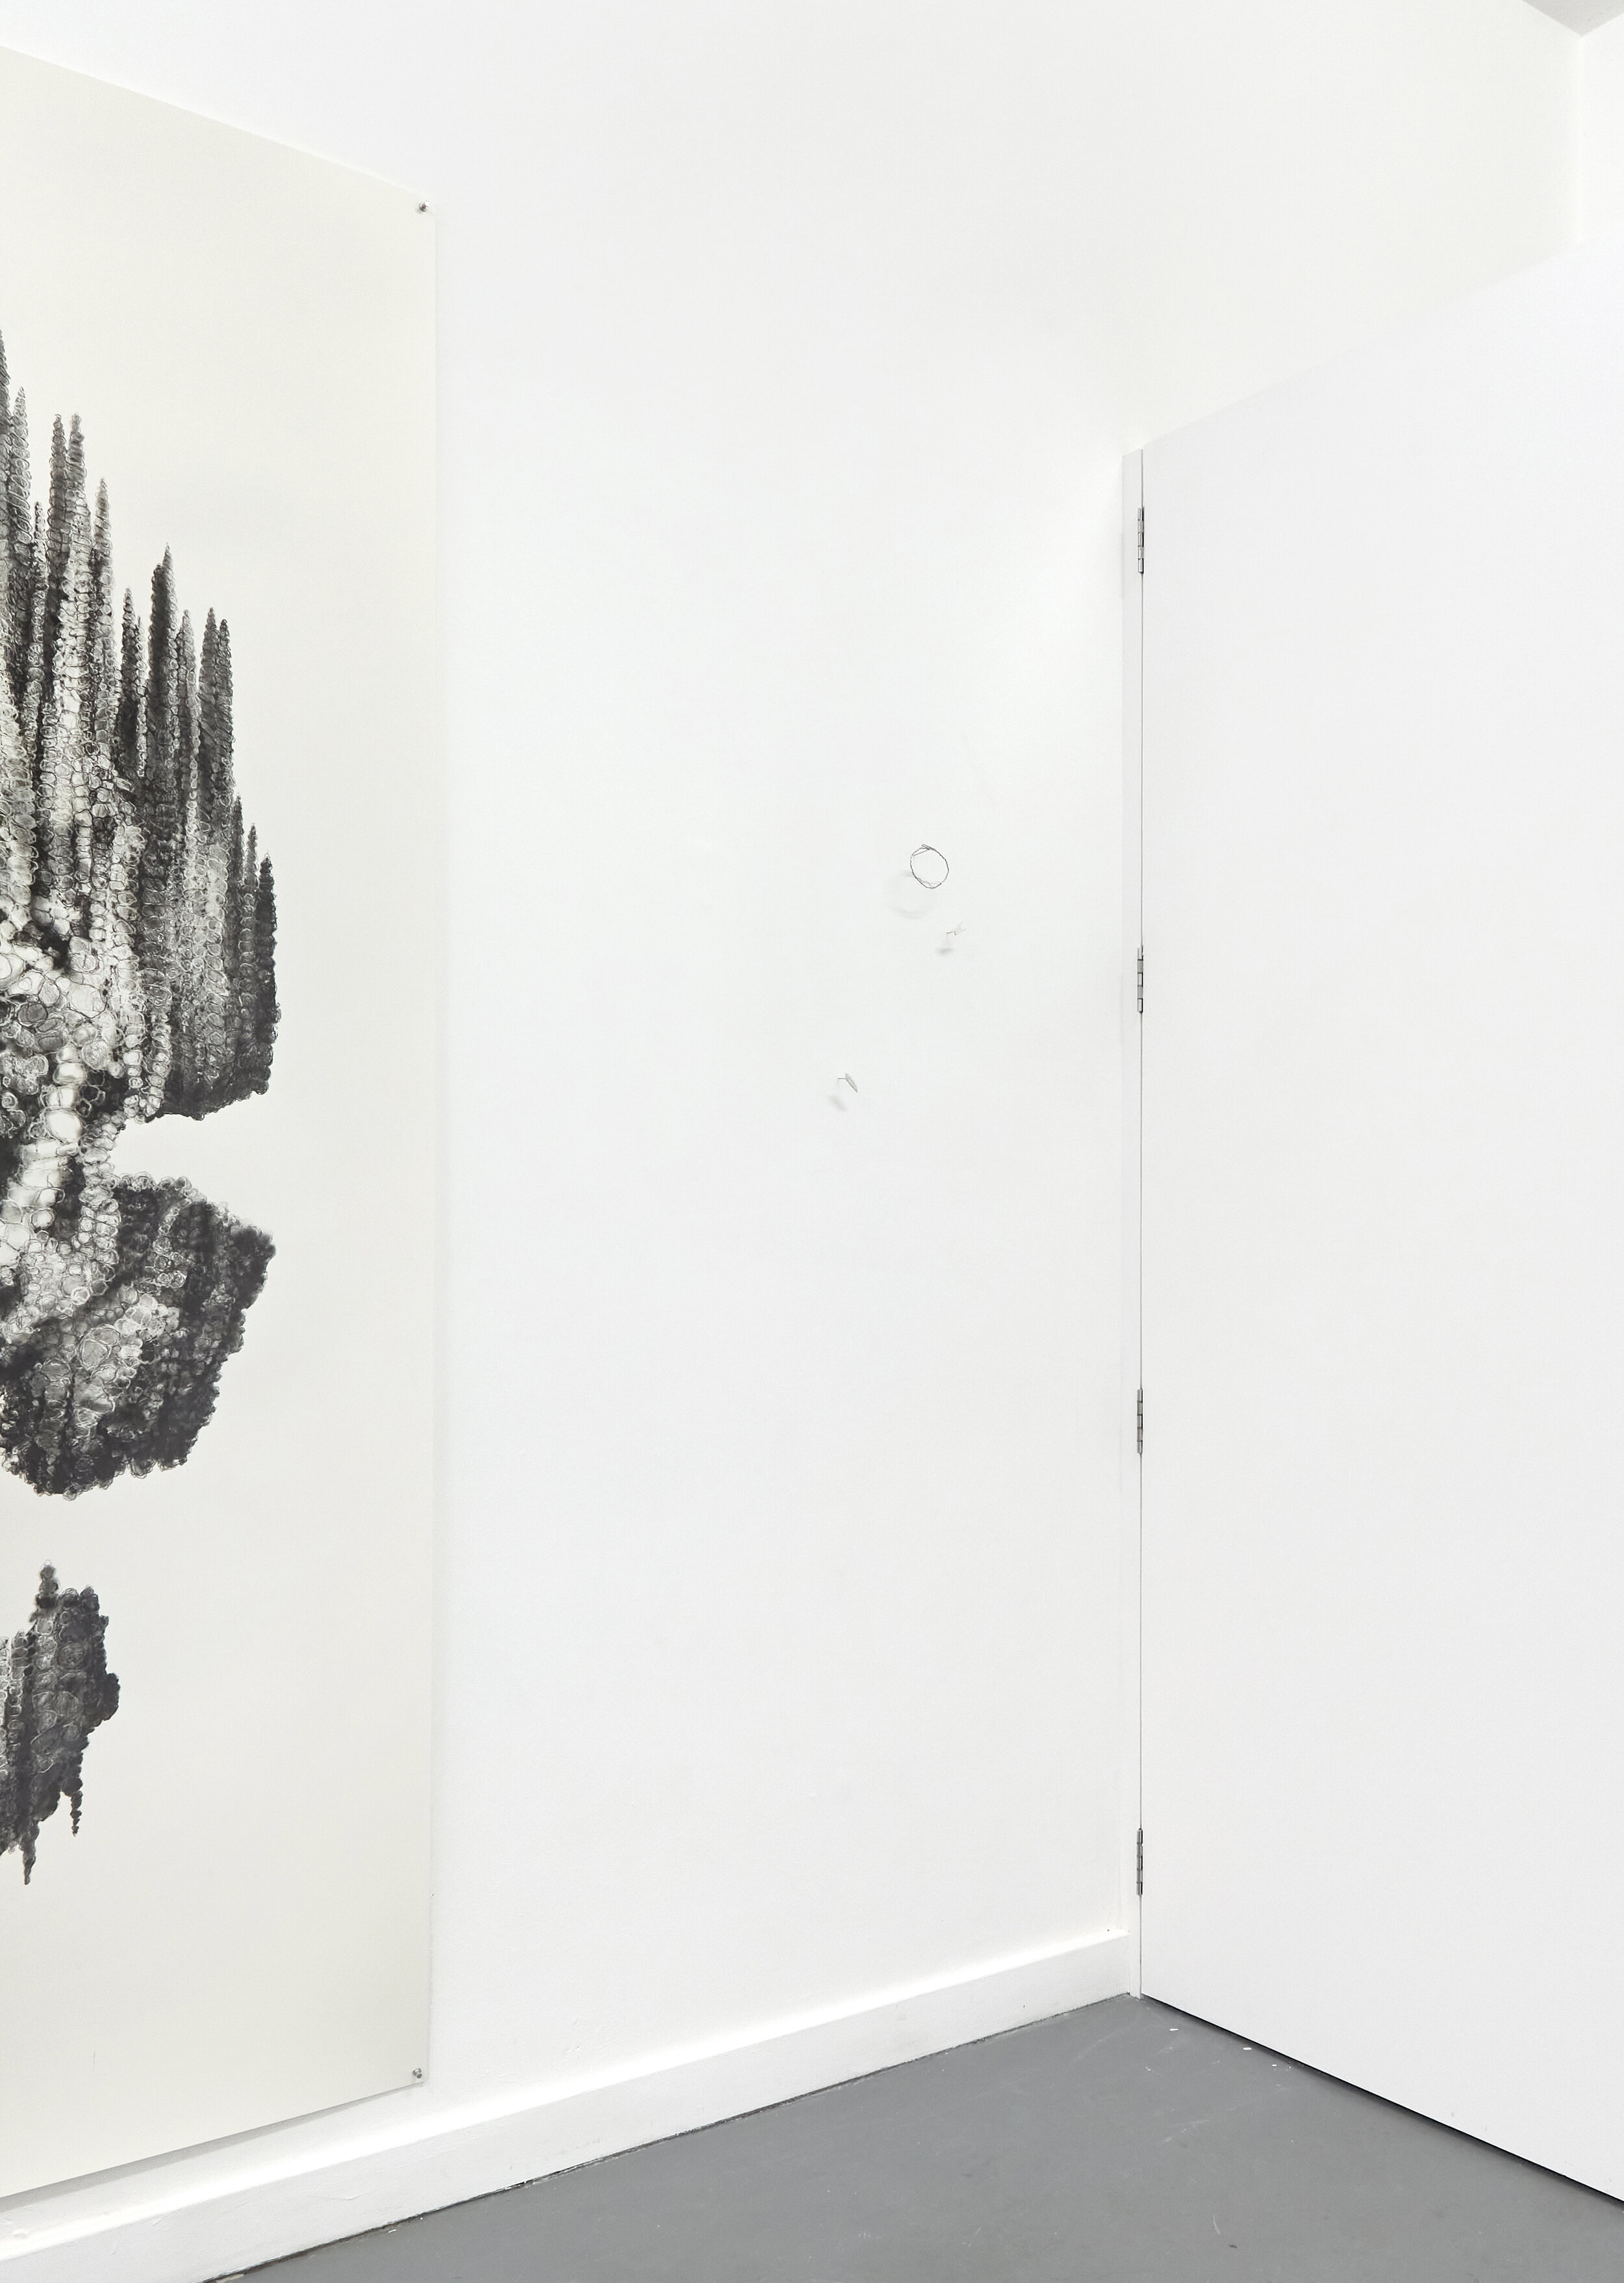  Installation view of ‘Floating Heads’ exhibition at Xxijra Hii project space in Deptford, London, 2021. On the left: ‘Oiwa’, pencil on paper, 231.5 x 171cm, 2021. On the right (just visible) 3 ‘Motes’, wire and clay, dimensions variable but all tiny